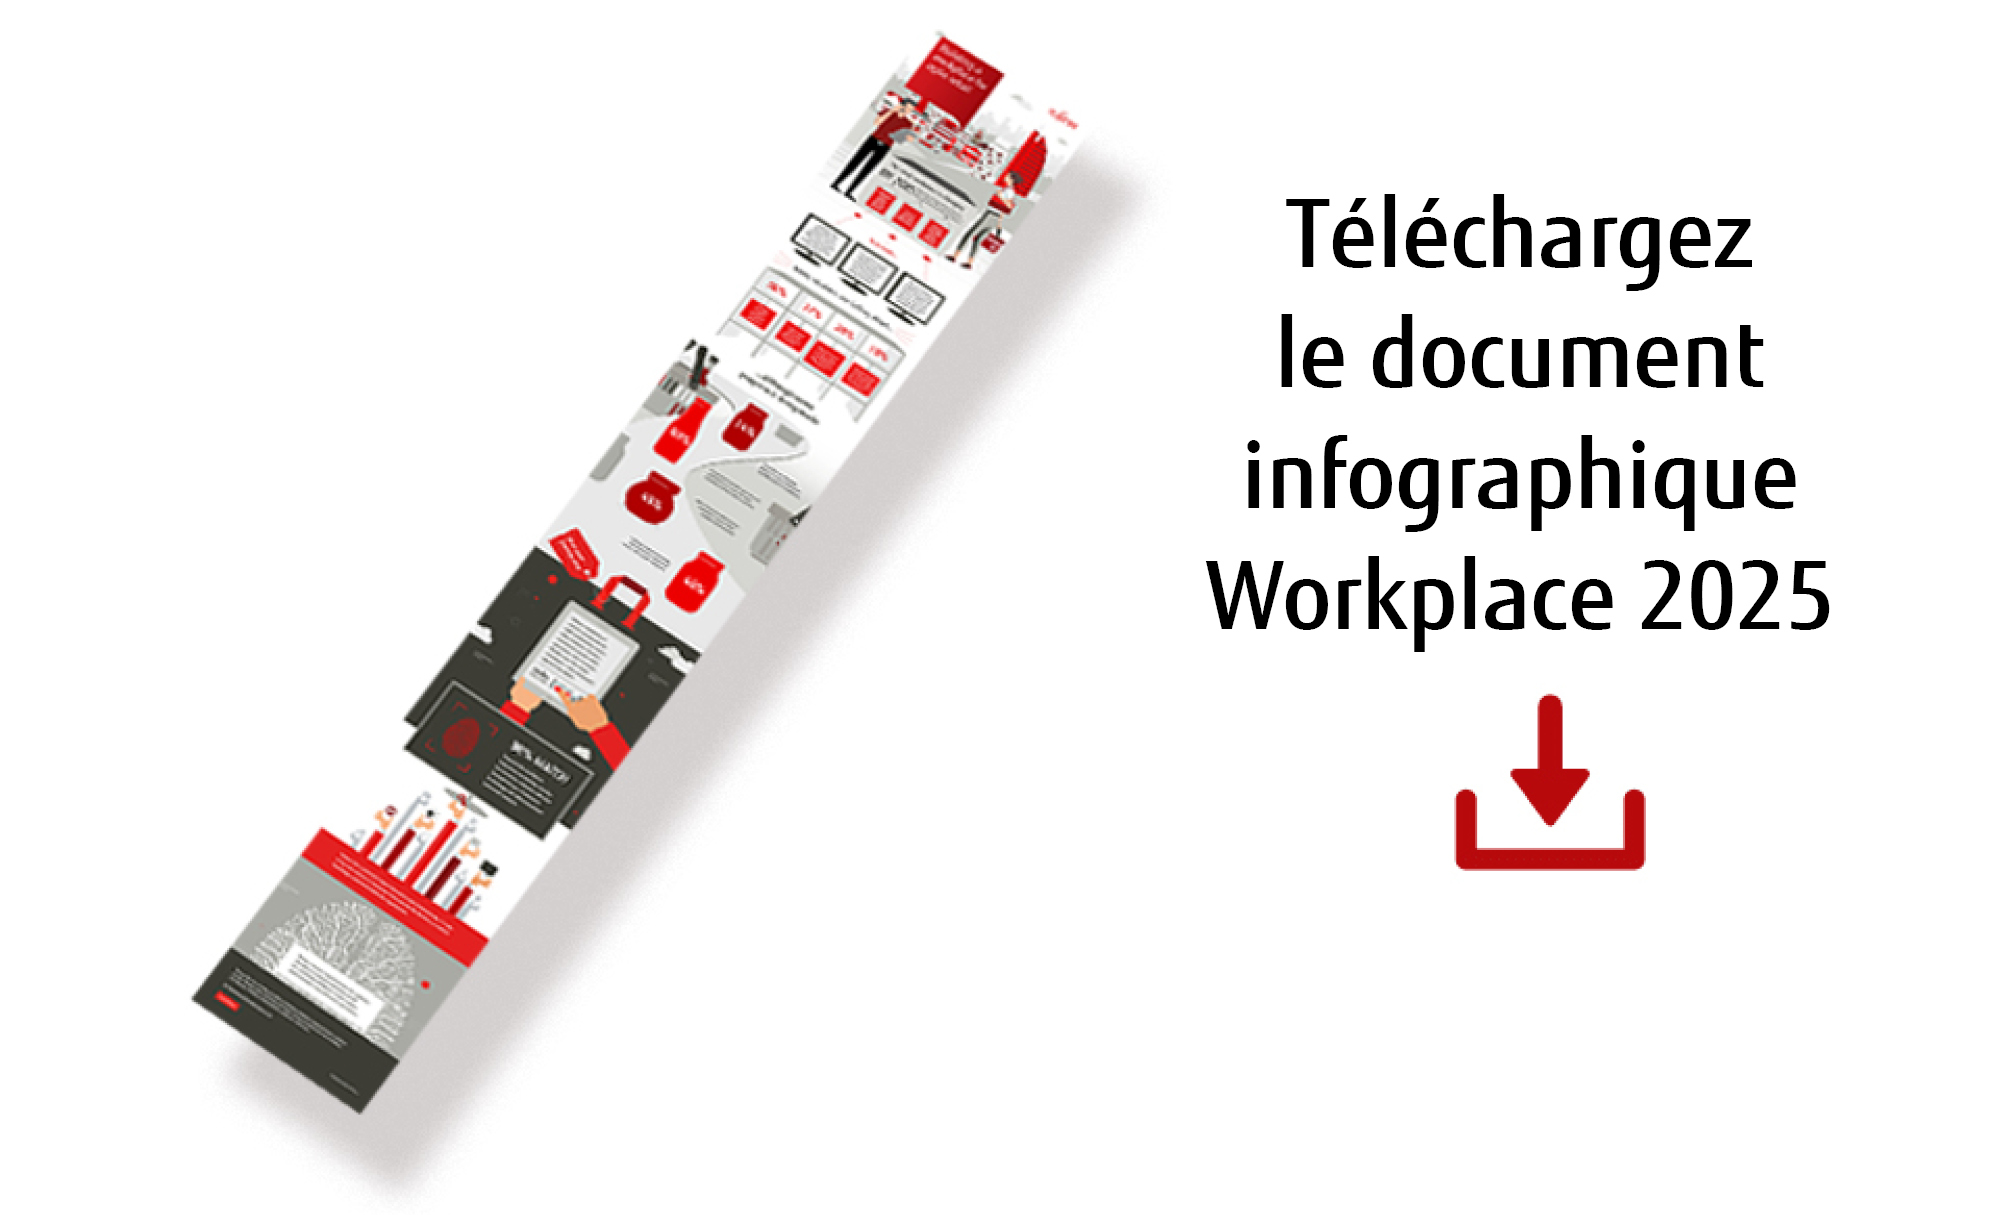 Workplace 2025 - Infographic 